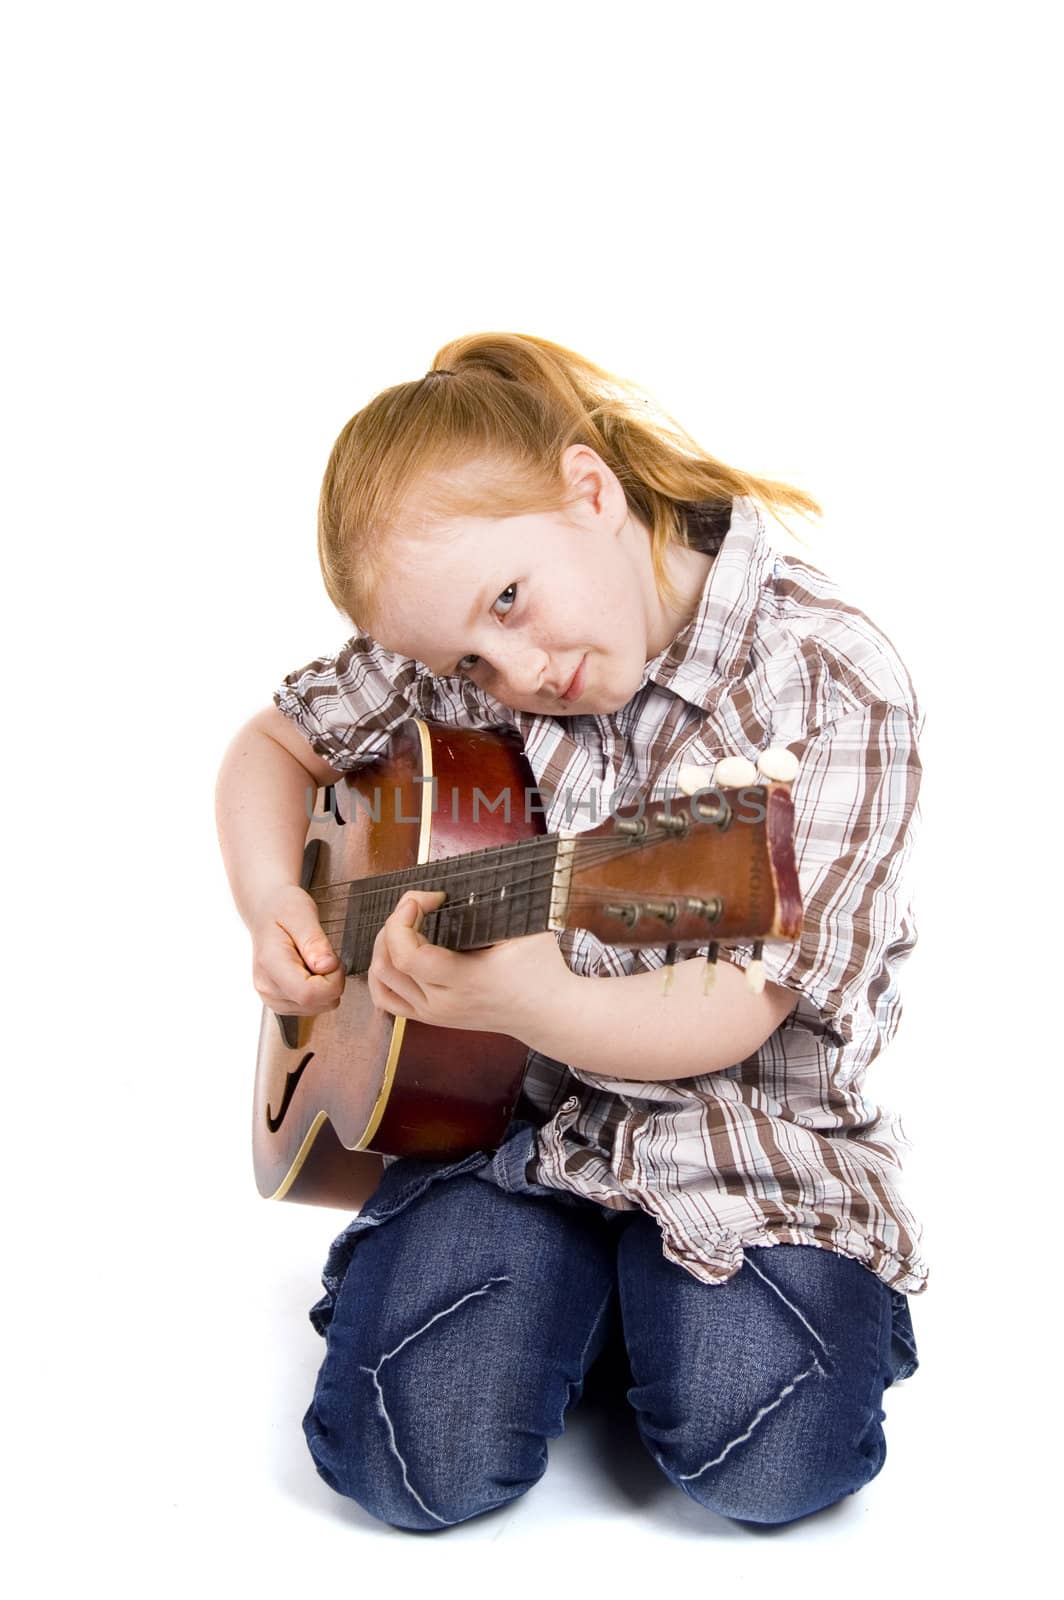 little girl playing on a guitar

